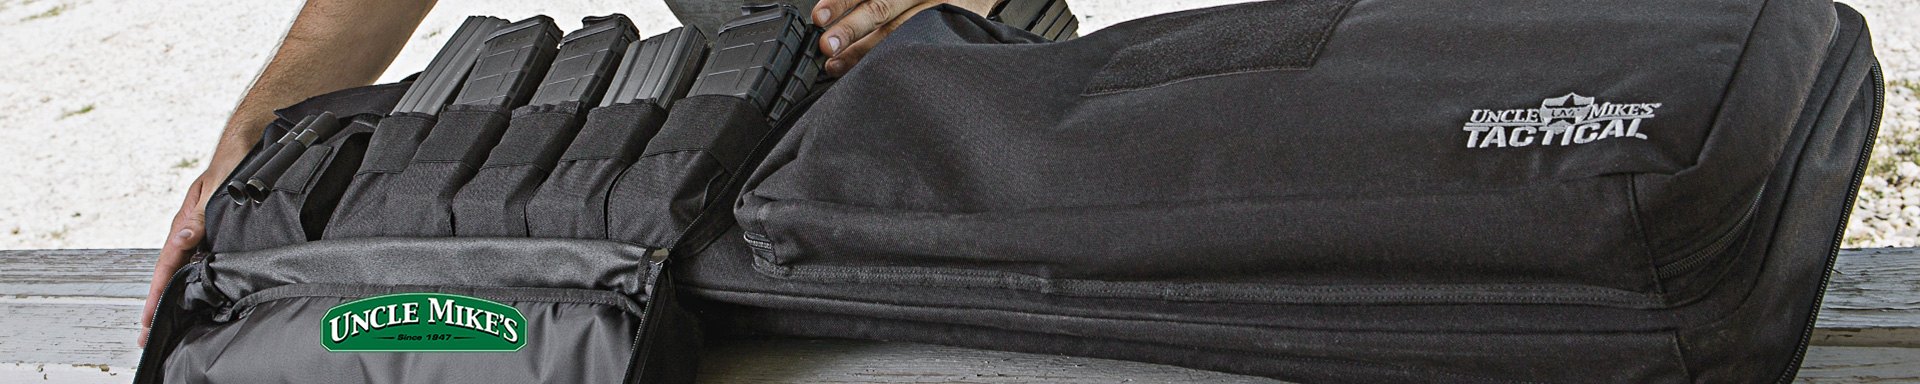 Uncle Mike's Tactical Pouches & Organizers